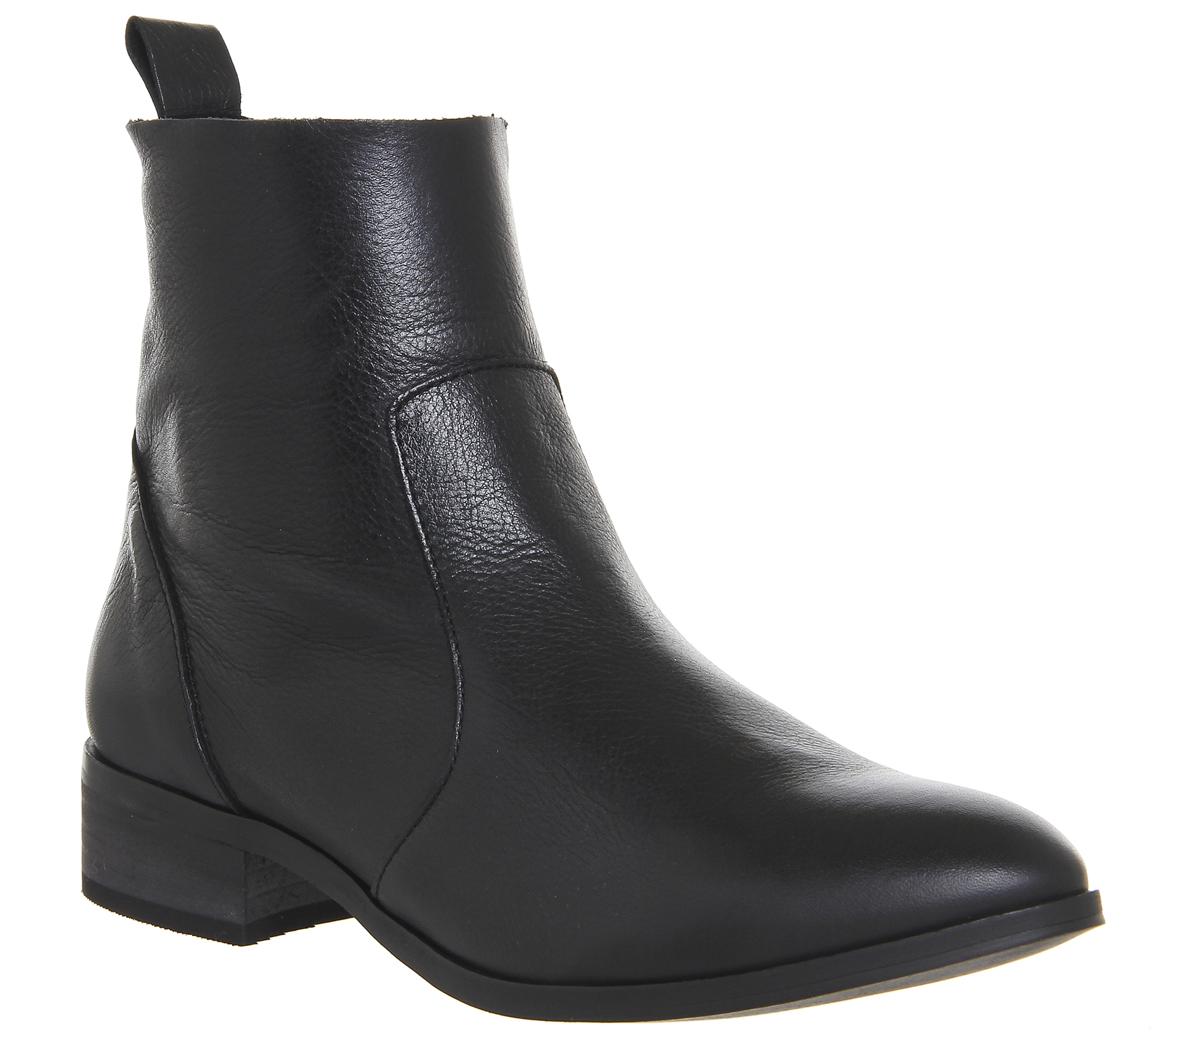 OFFICE Ashleigh Flat Ankle Boots Black Leather - Women's Ankle Boots